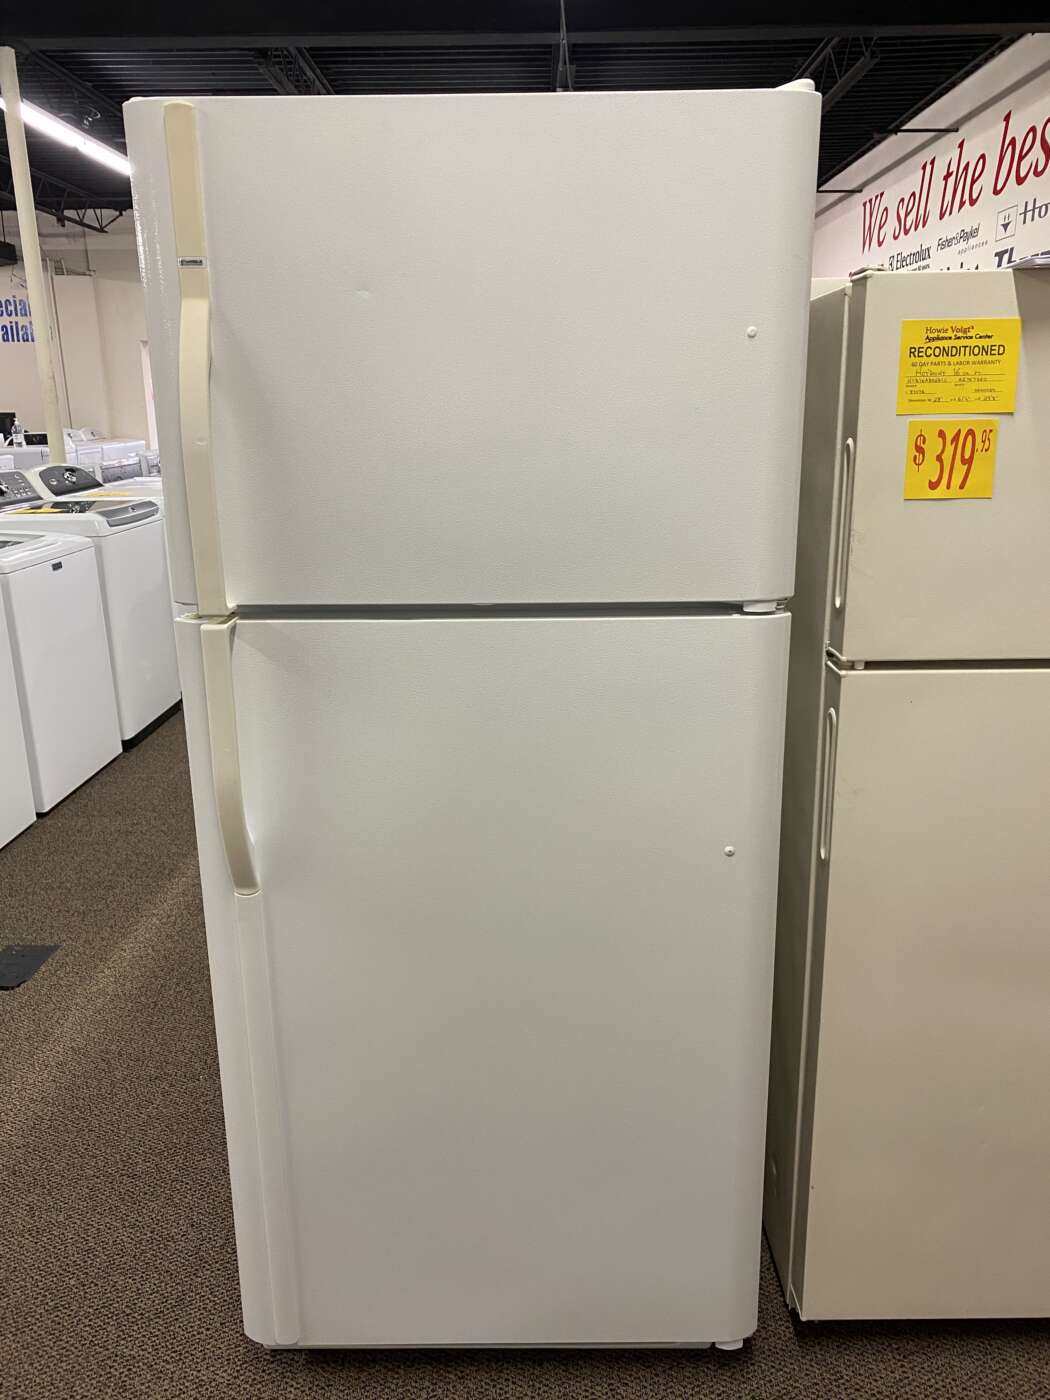 Reconditioned KENMORE 21 Cu. Ft. Top-Freezer Refrigerator – White